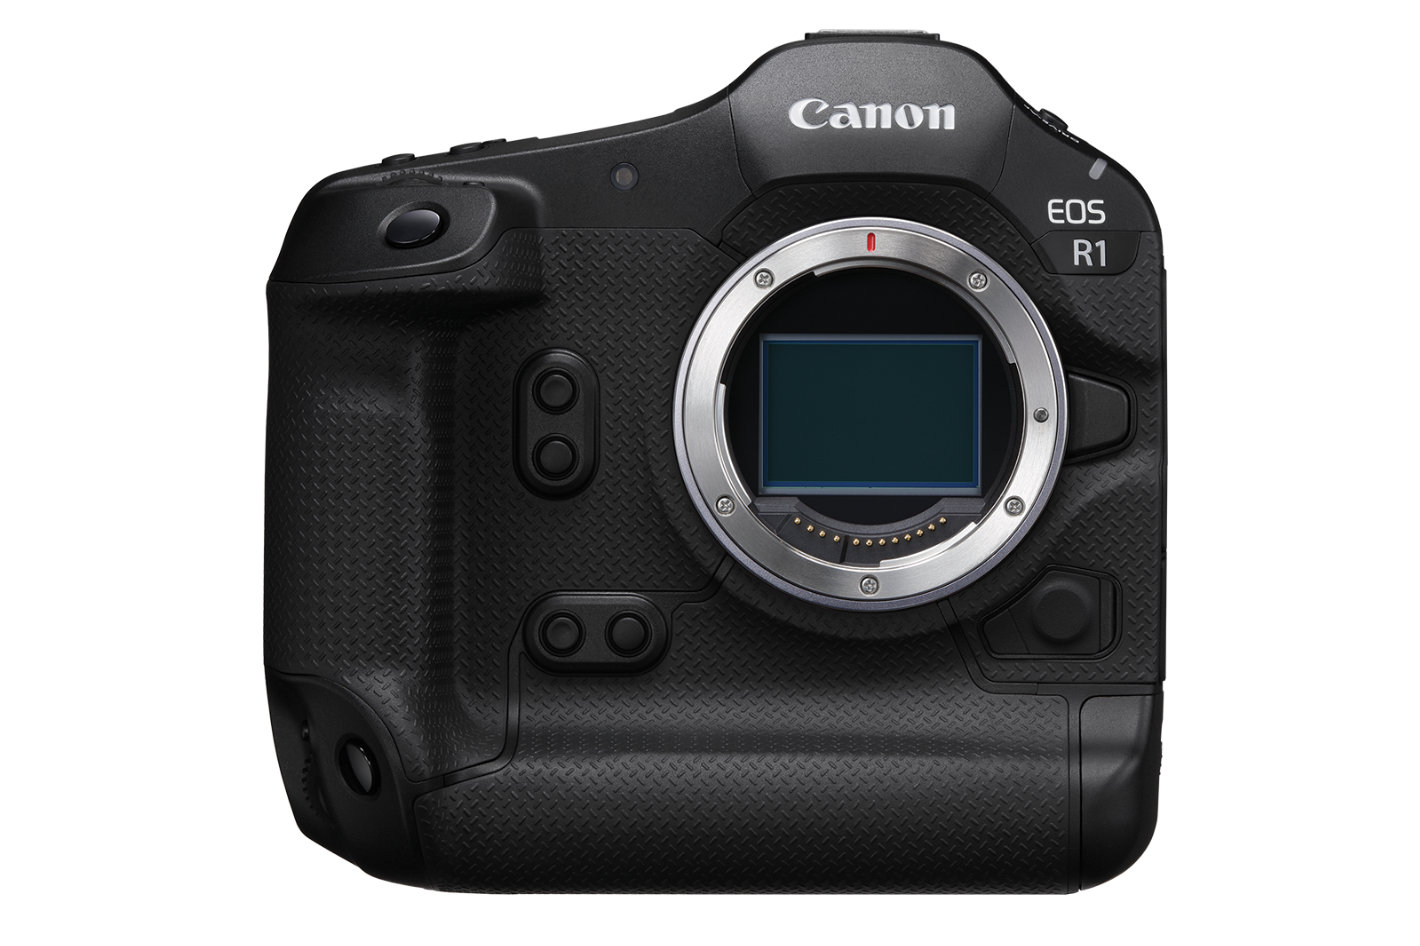 Canon EOS R1: is this the ONE everyone has been waiting for? 2